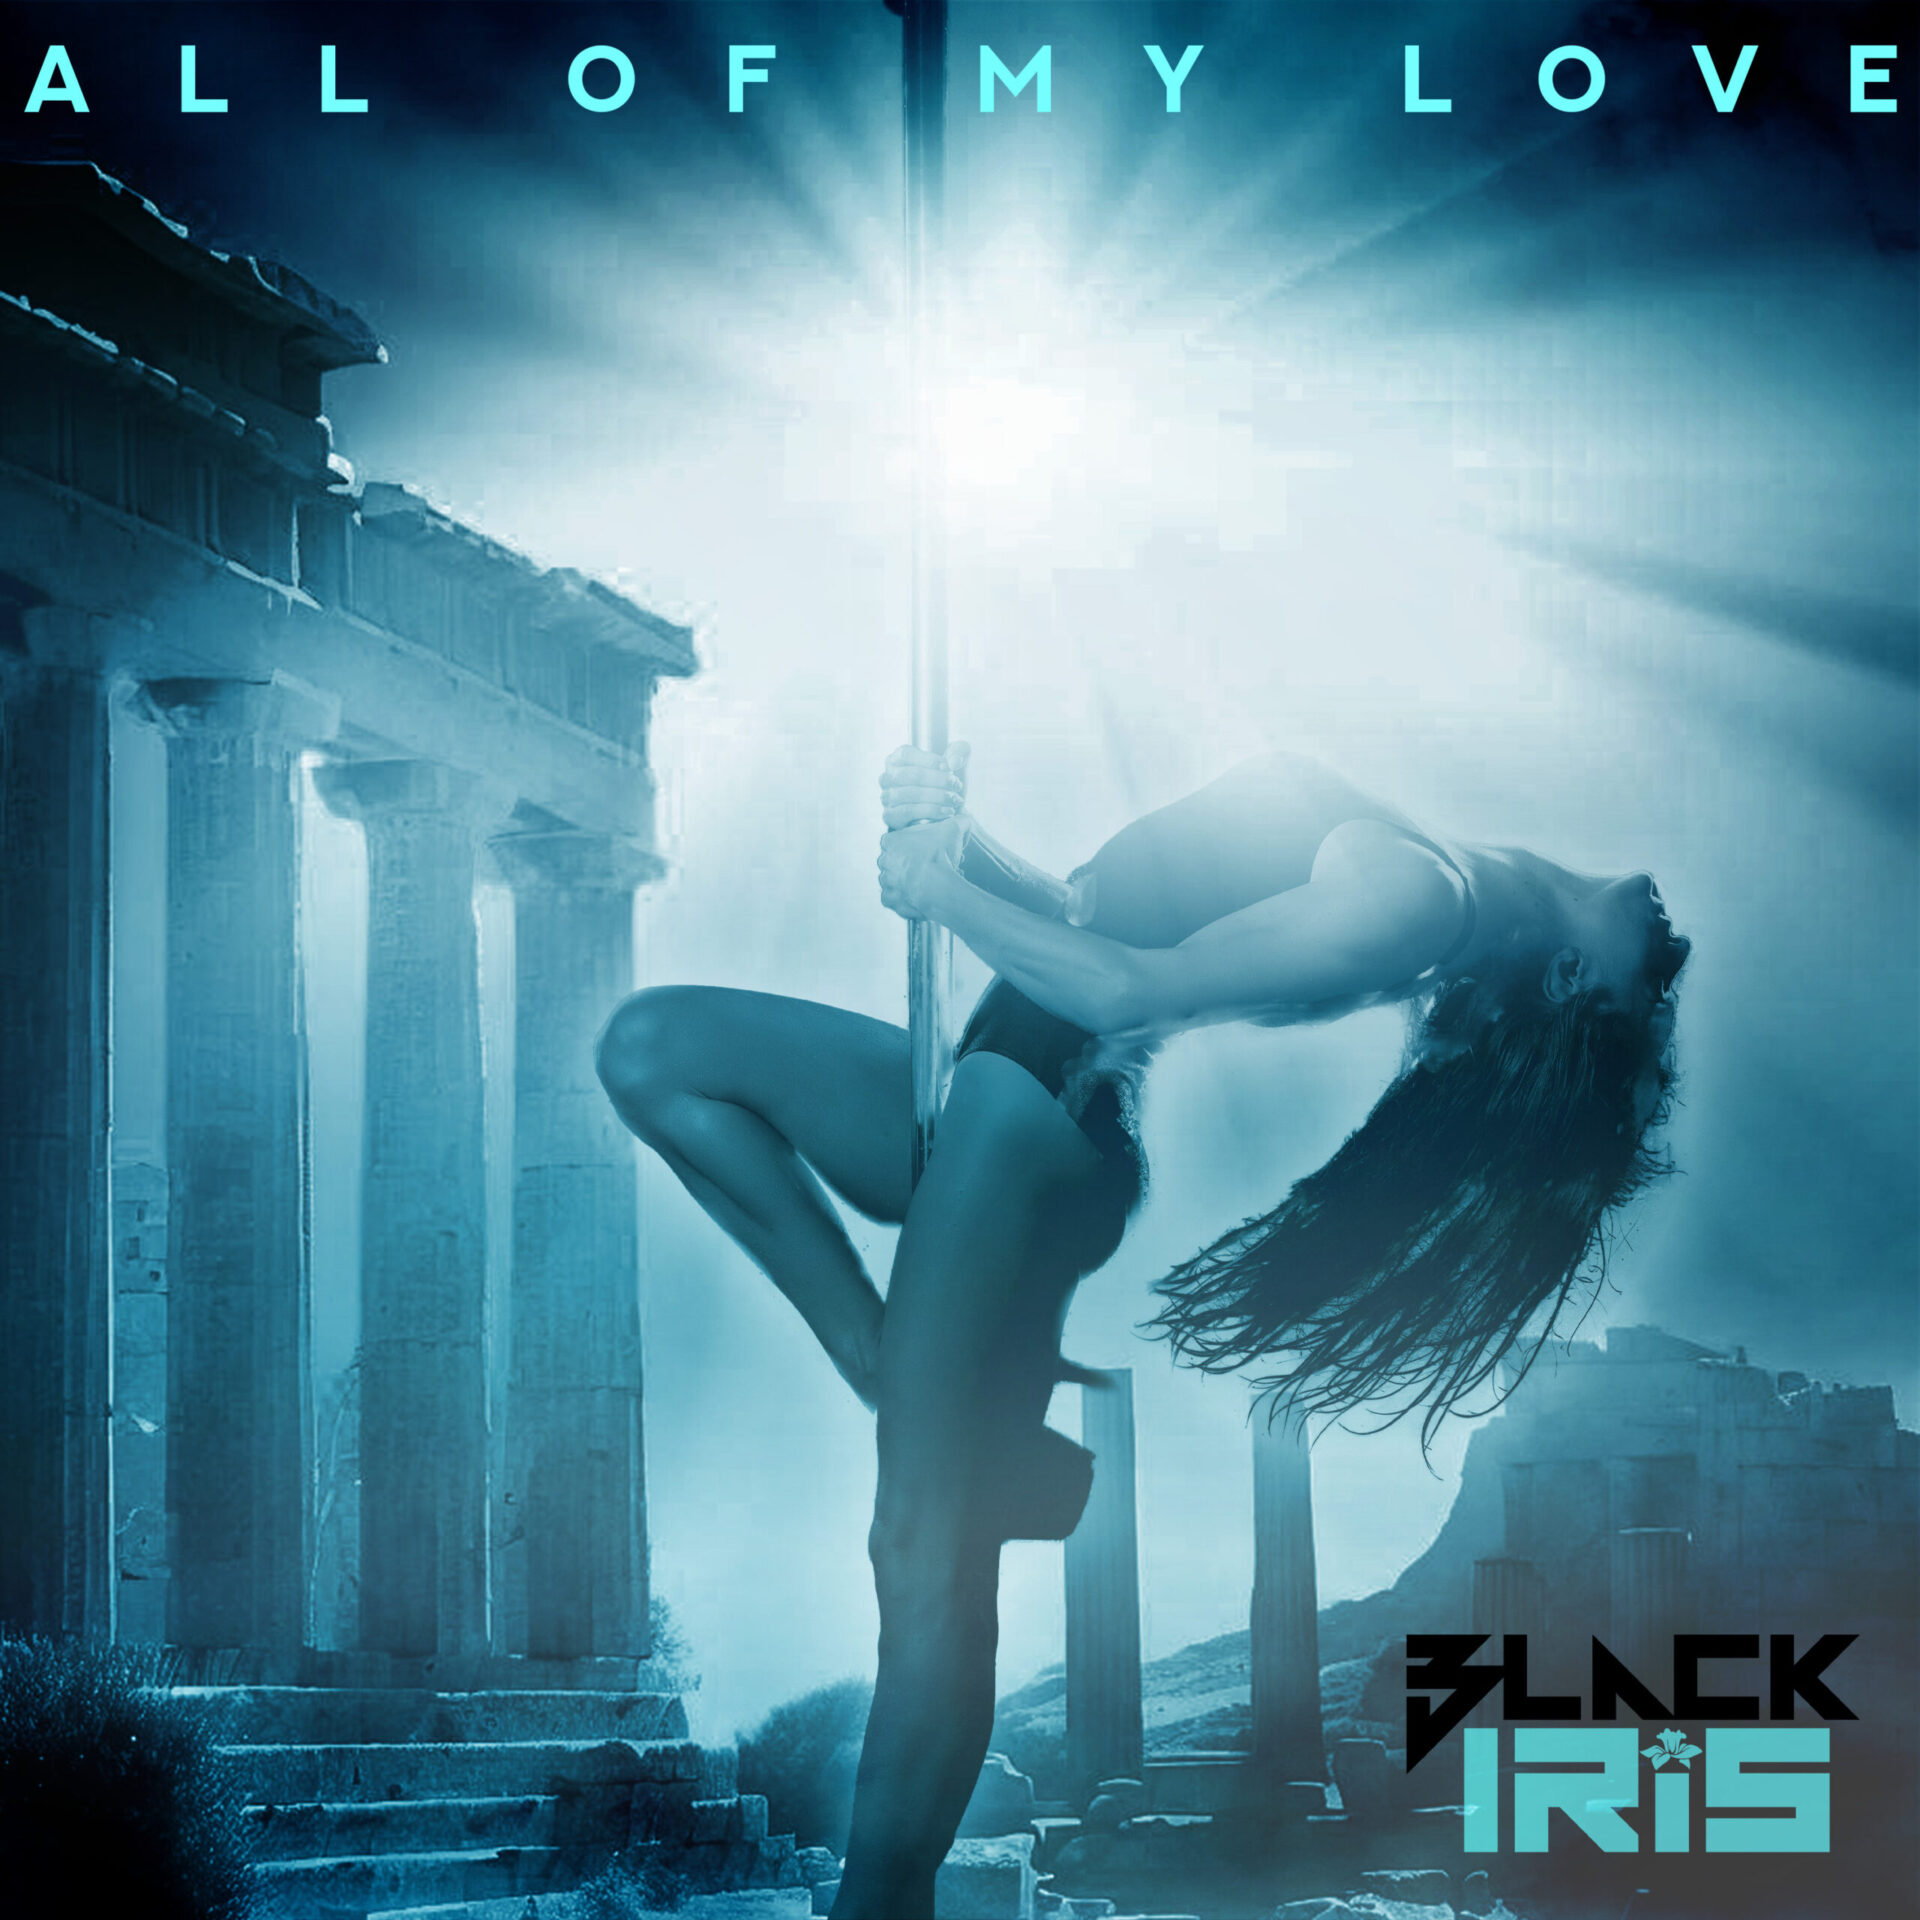 Black Iris out with 'All Of My Love' covert art